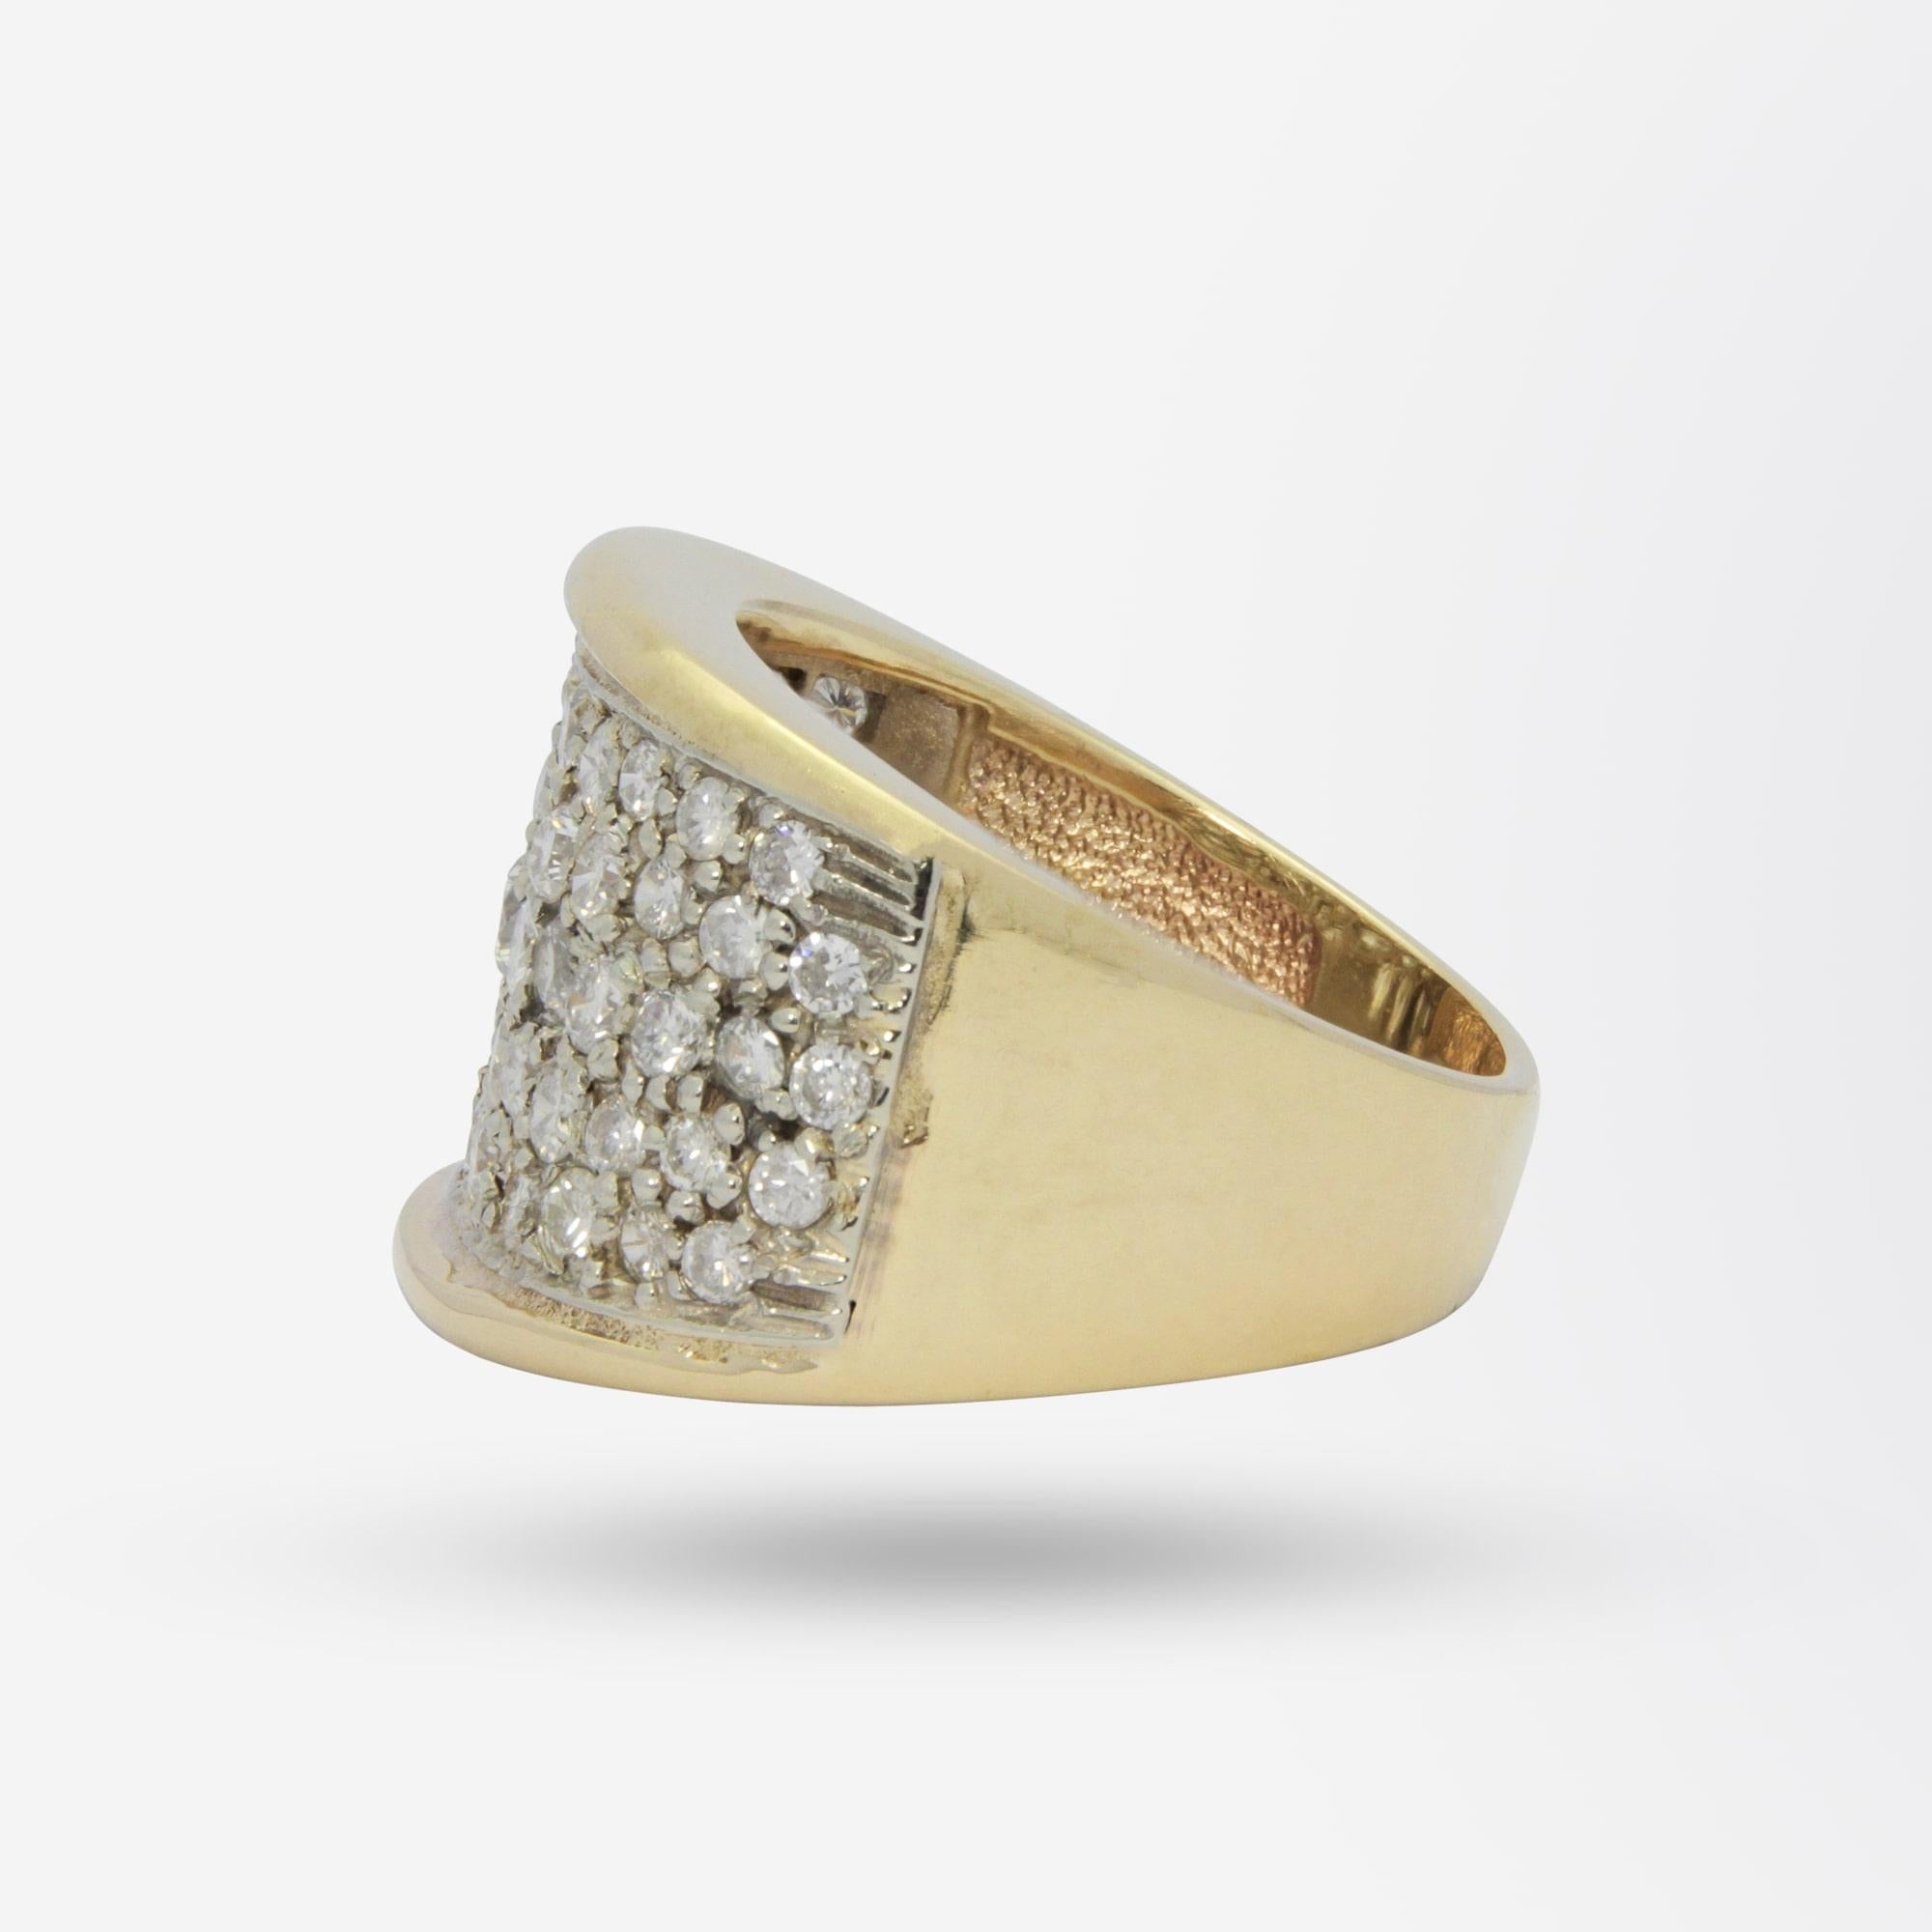 cigar band ring with diamonds